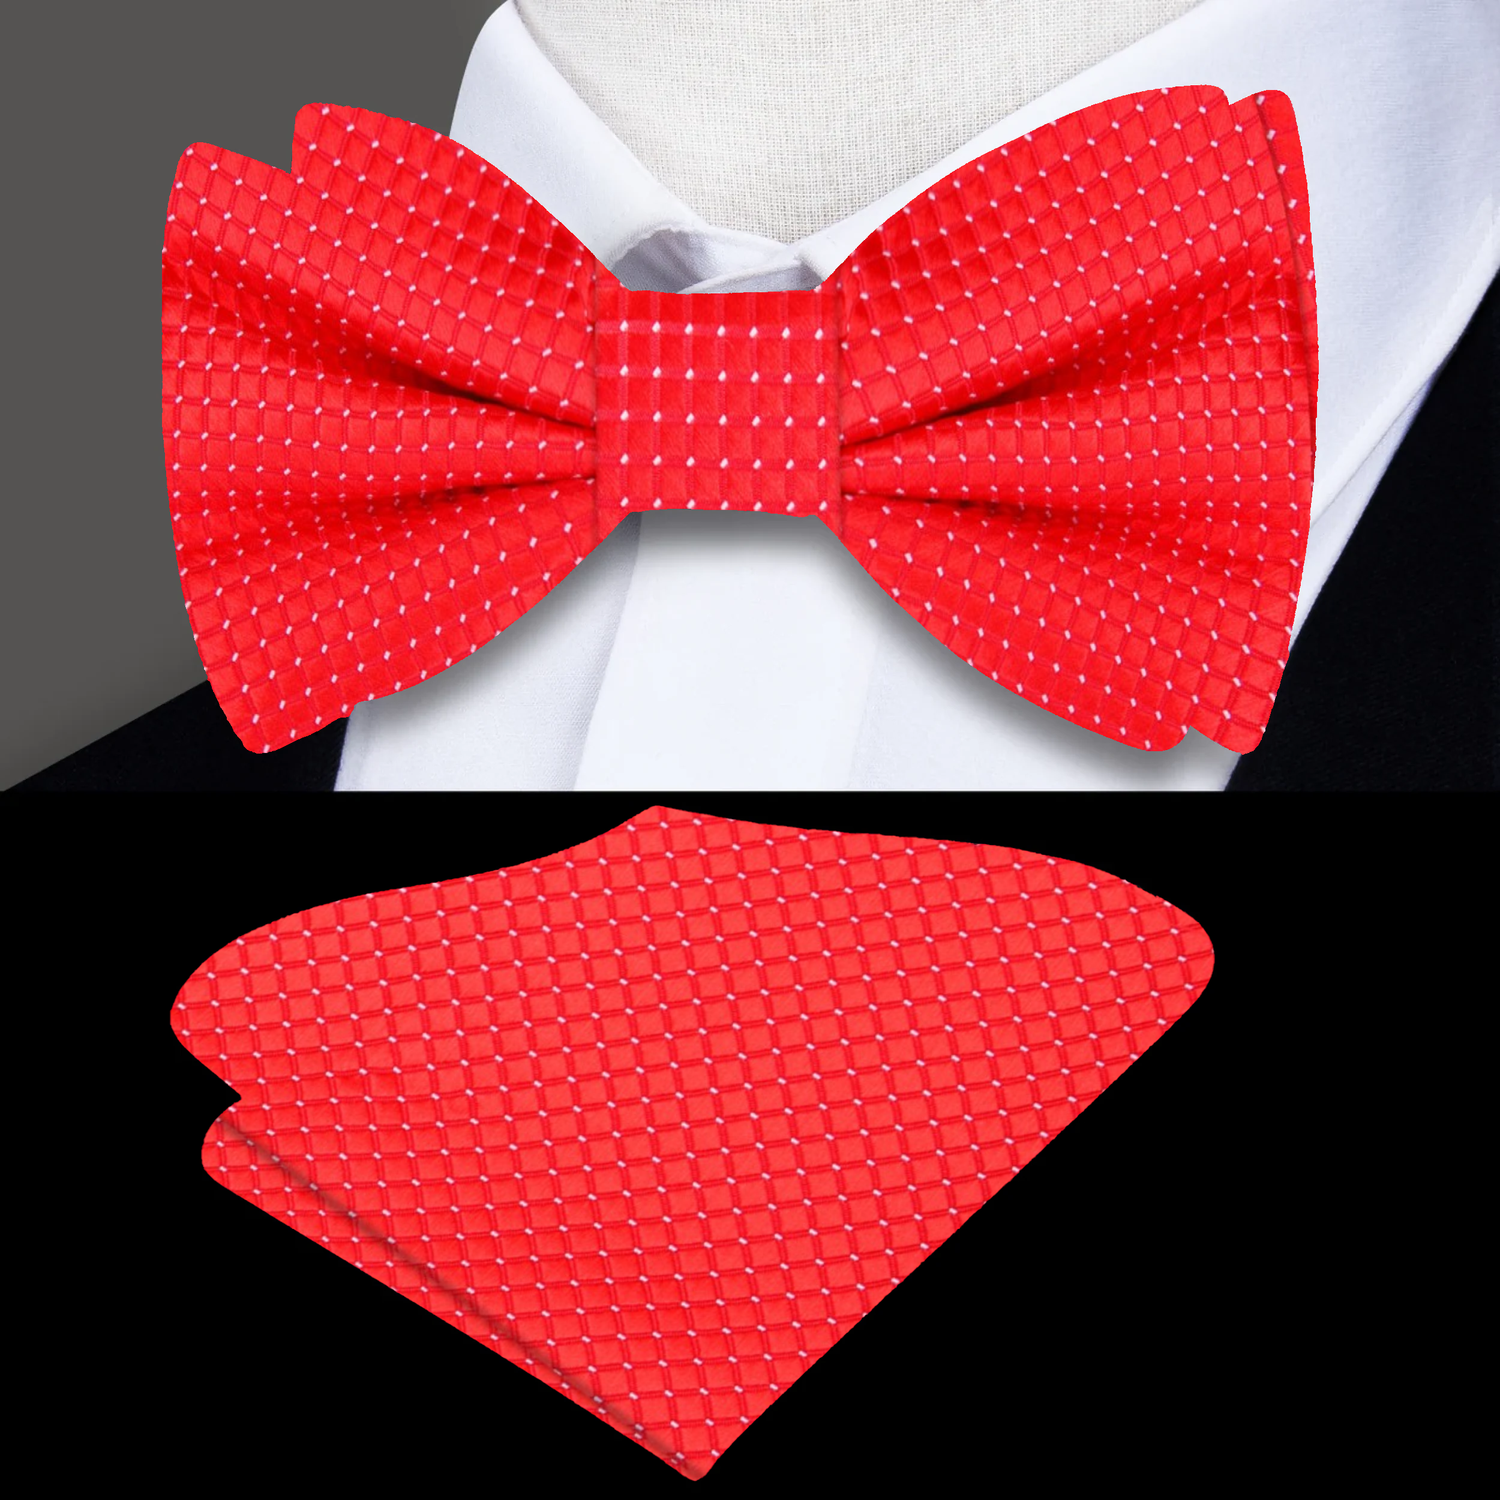 Main View: Red with White Geometric Texture Bow Tie and Pocket Square